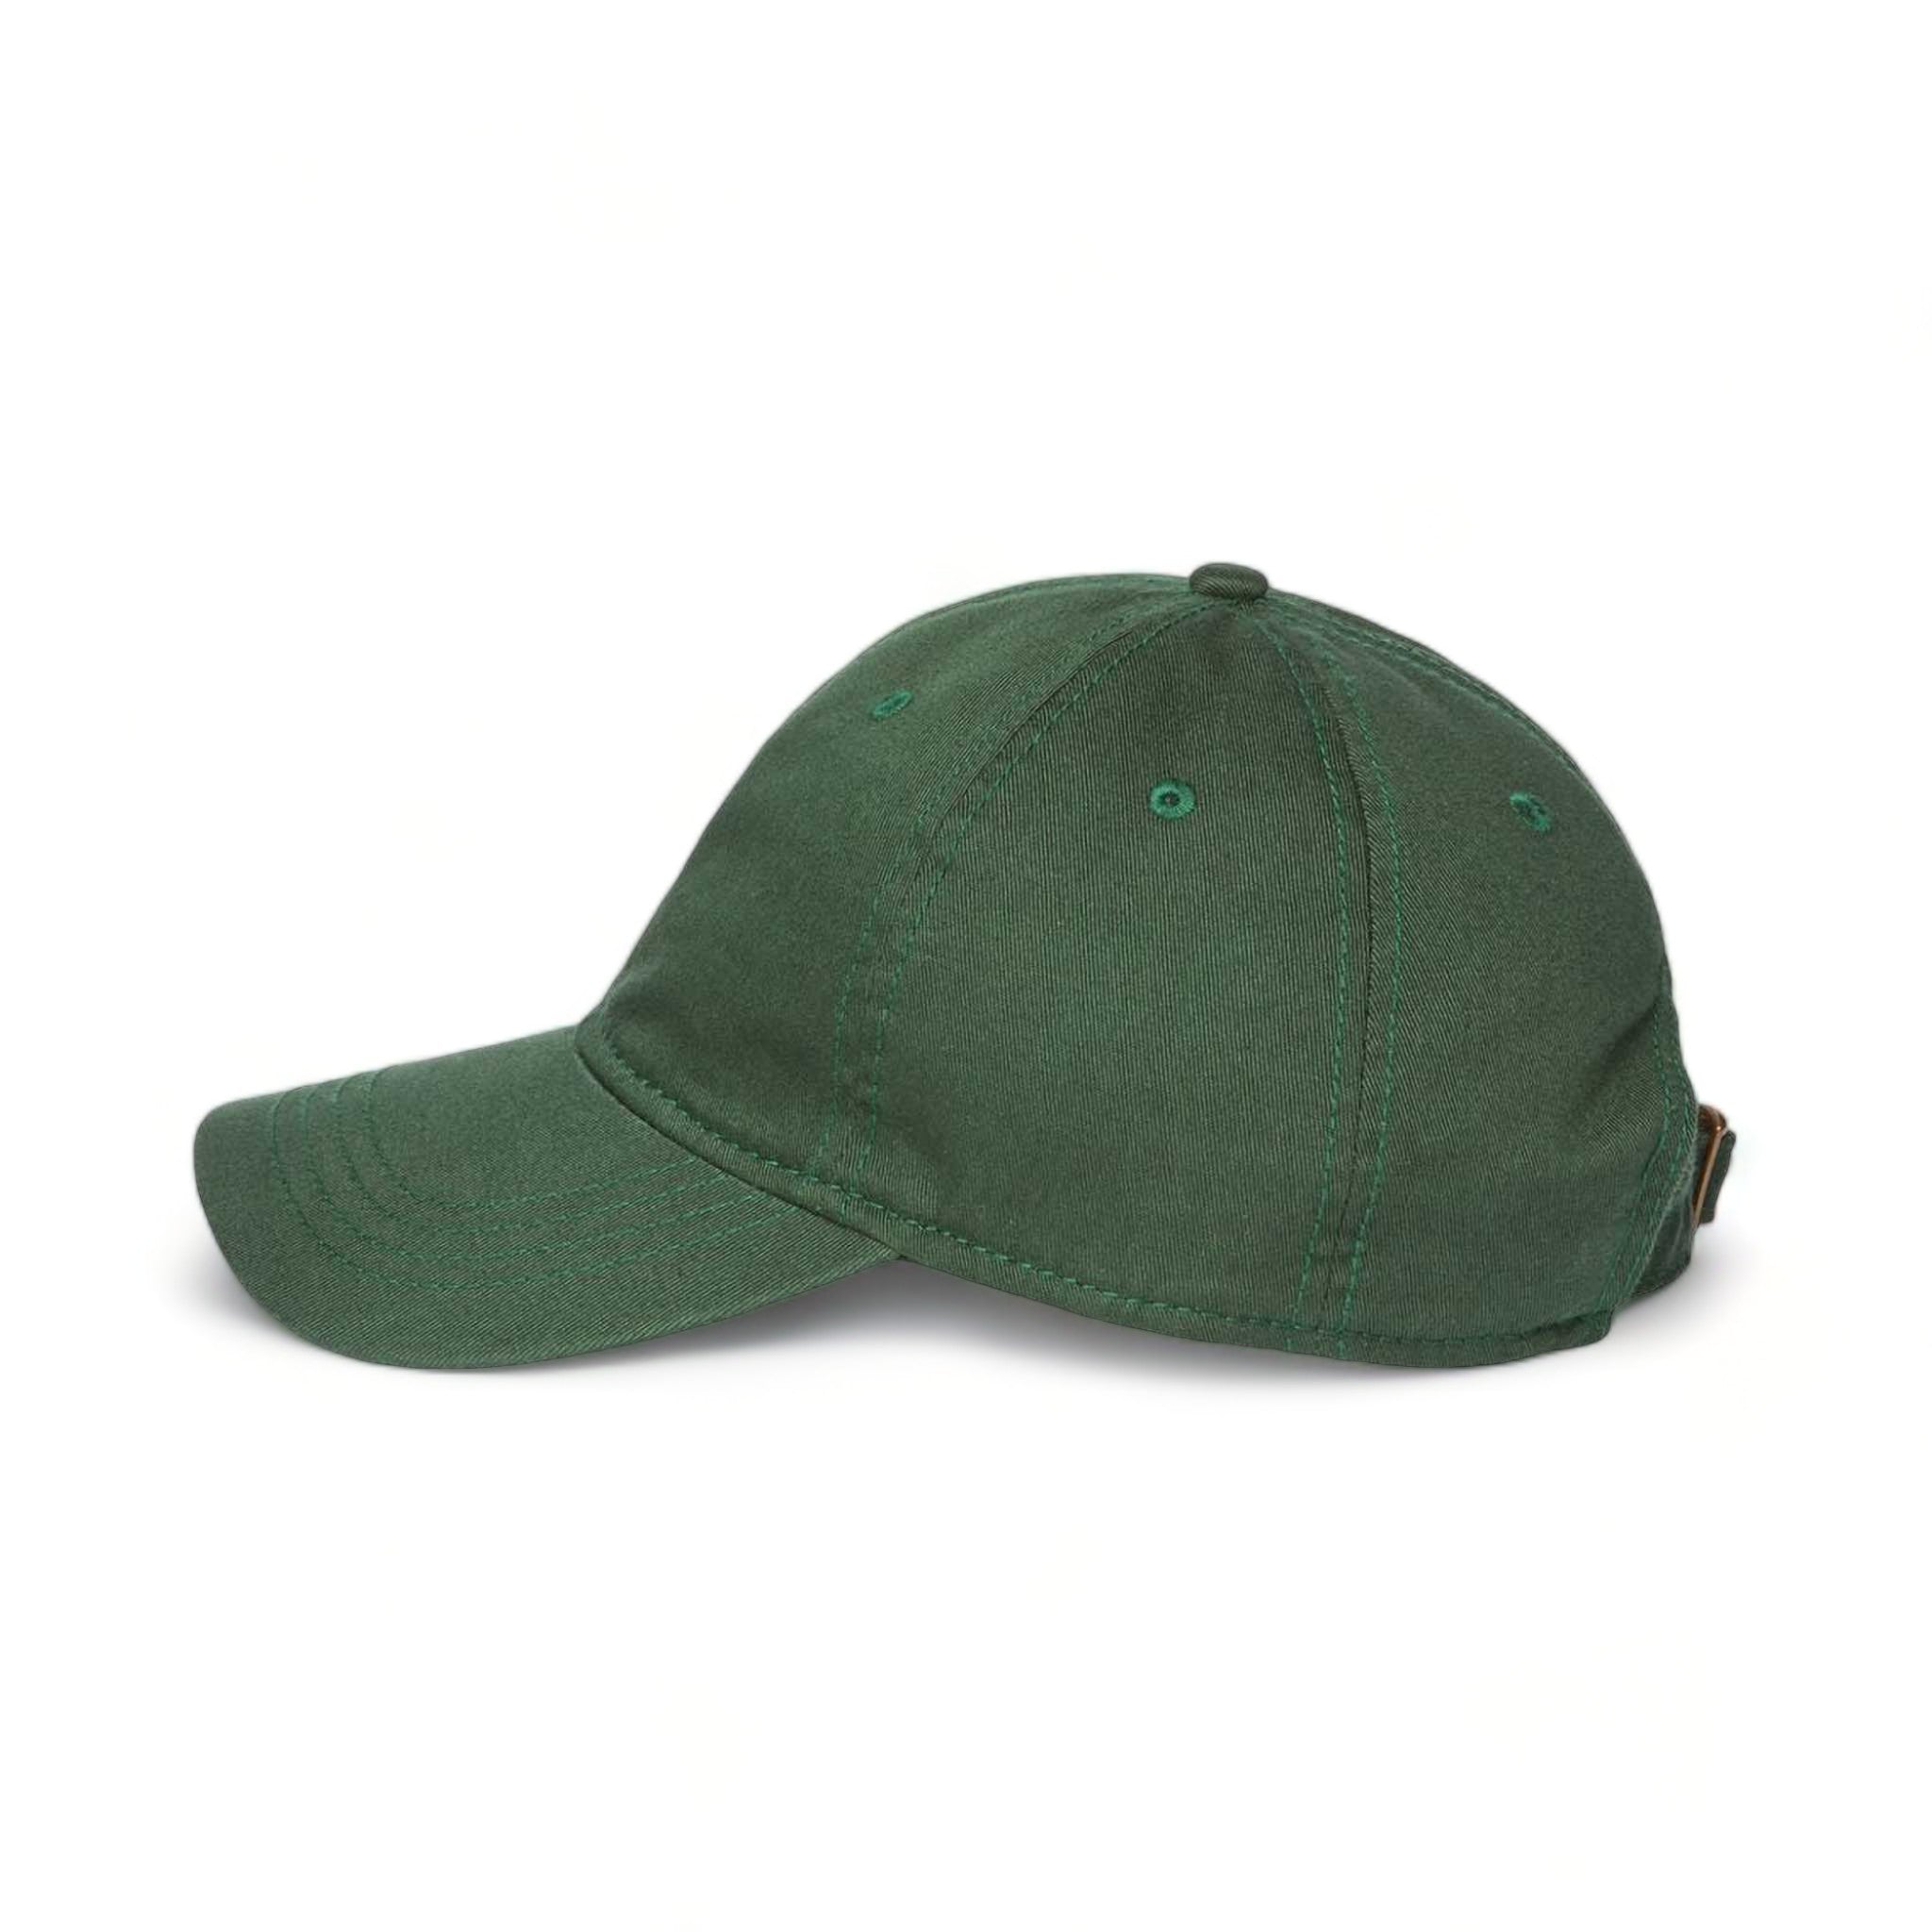 Side view of CAP AMERICA i1002 custom hat in forest green